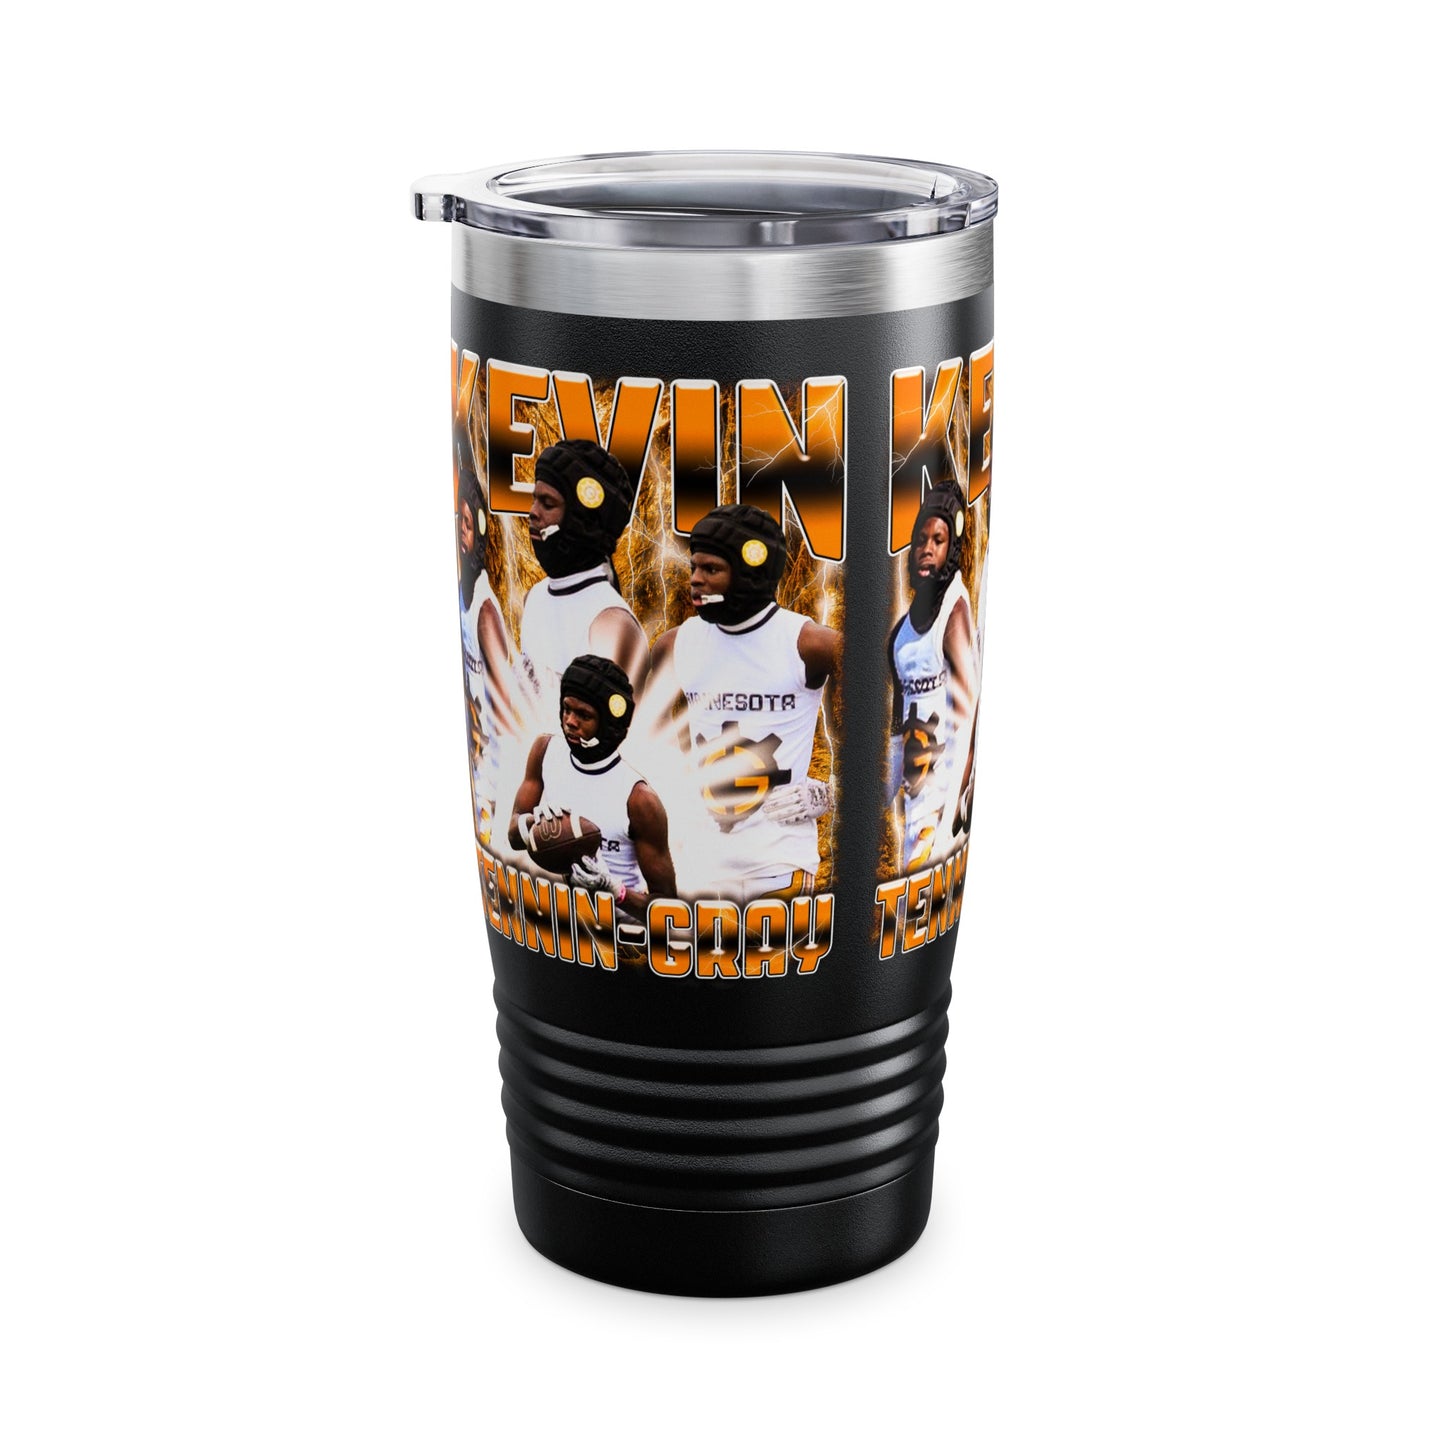 Kevin Tennin-Gray Stainless Steal Tumbler